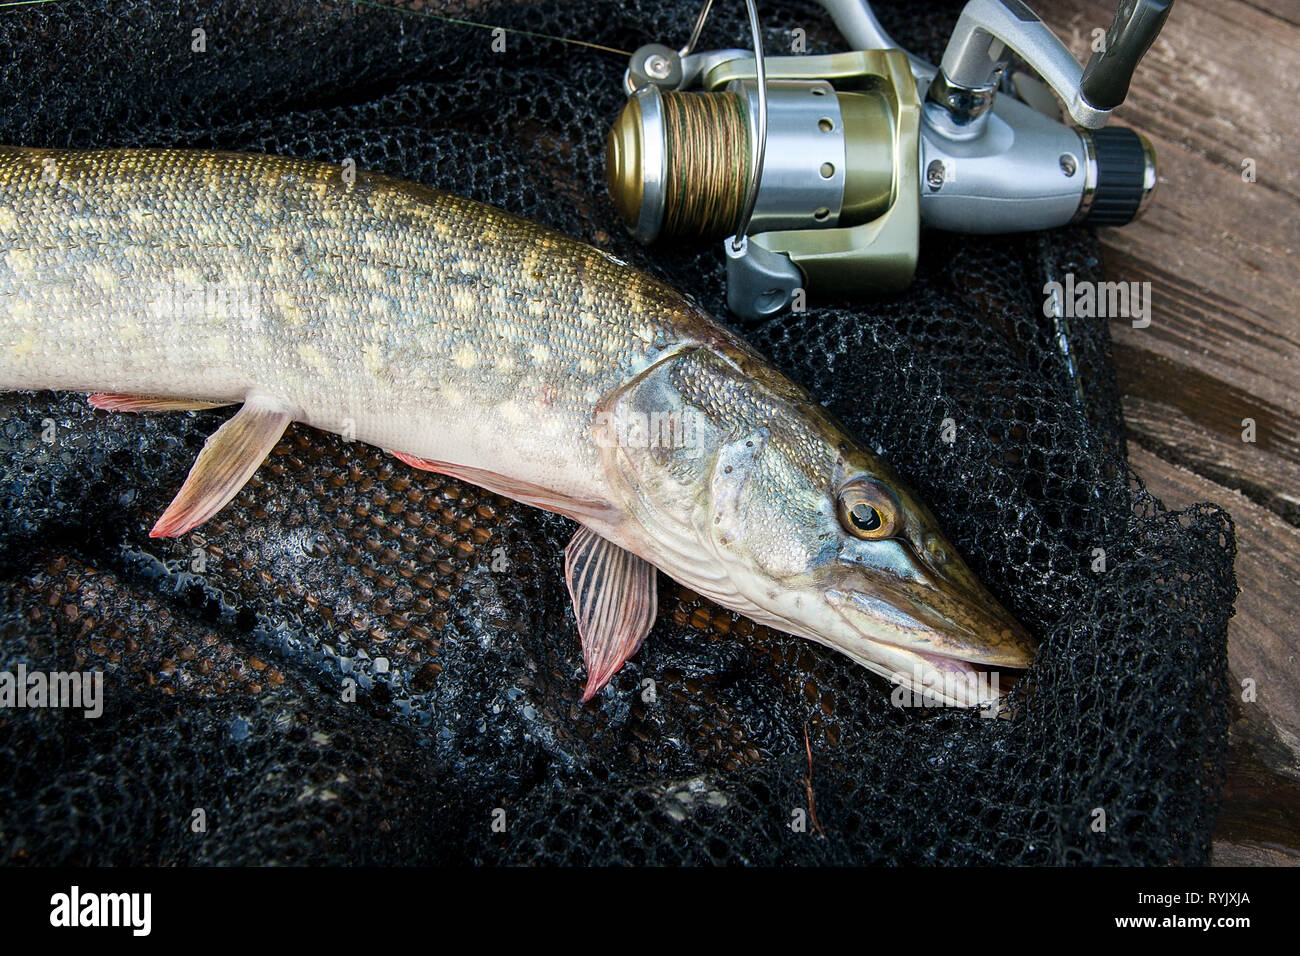 https://c8.alamy.com/comp/RYJXJA/freshwater-northern-pike-fish-know-as-esox-lucius-and-fishing-rod-with-reel-lying-on-black-fishing-net-fishing-concept-good-catch-big-freshwater-p-RYJXJA.jpg